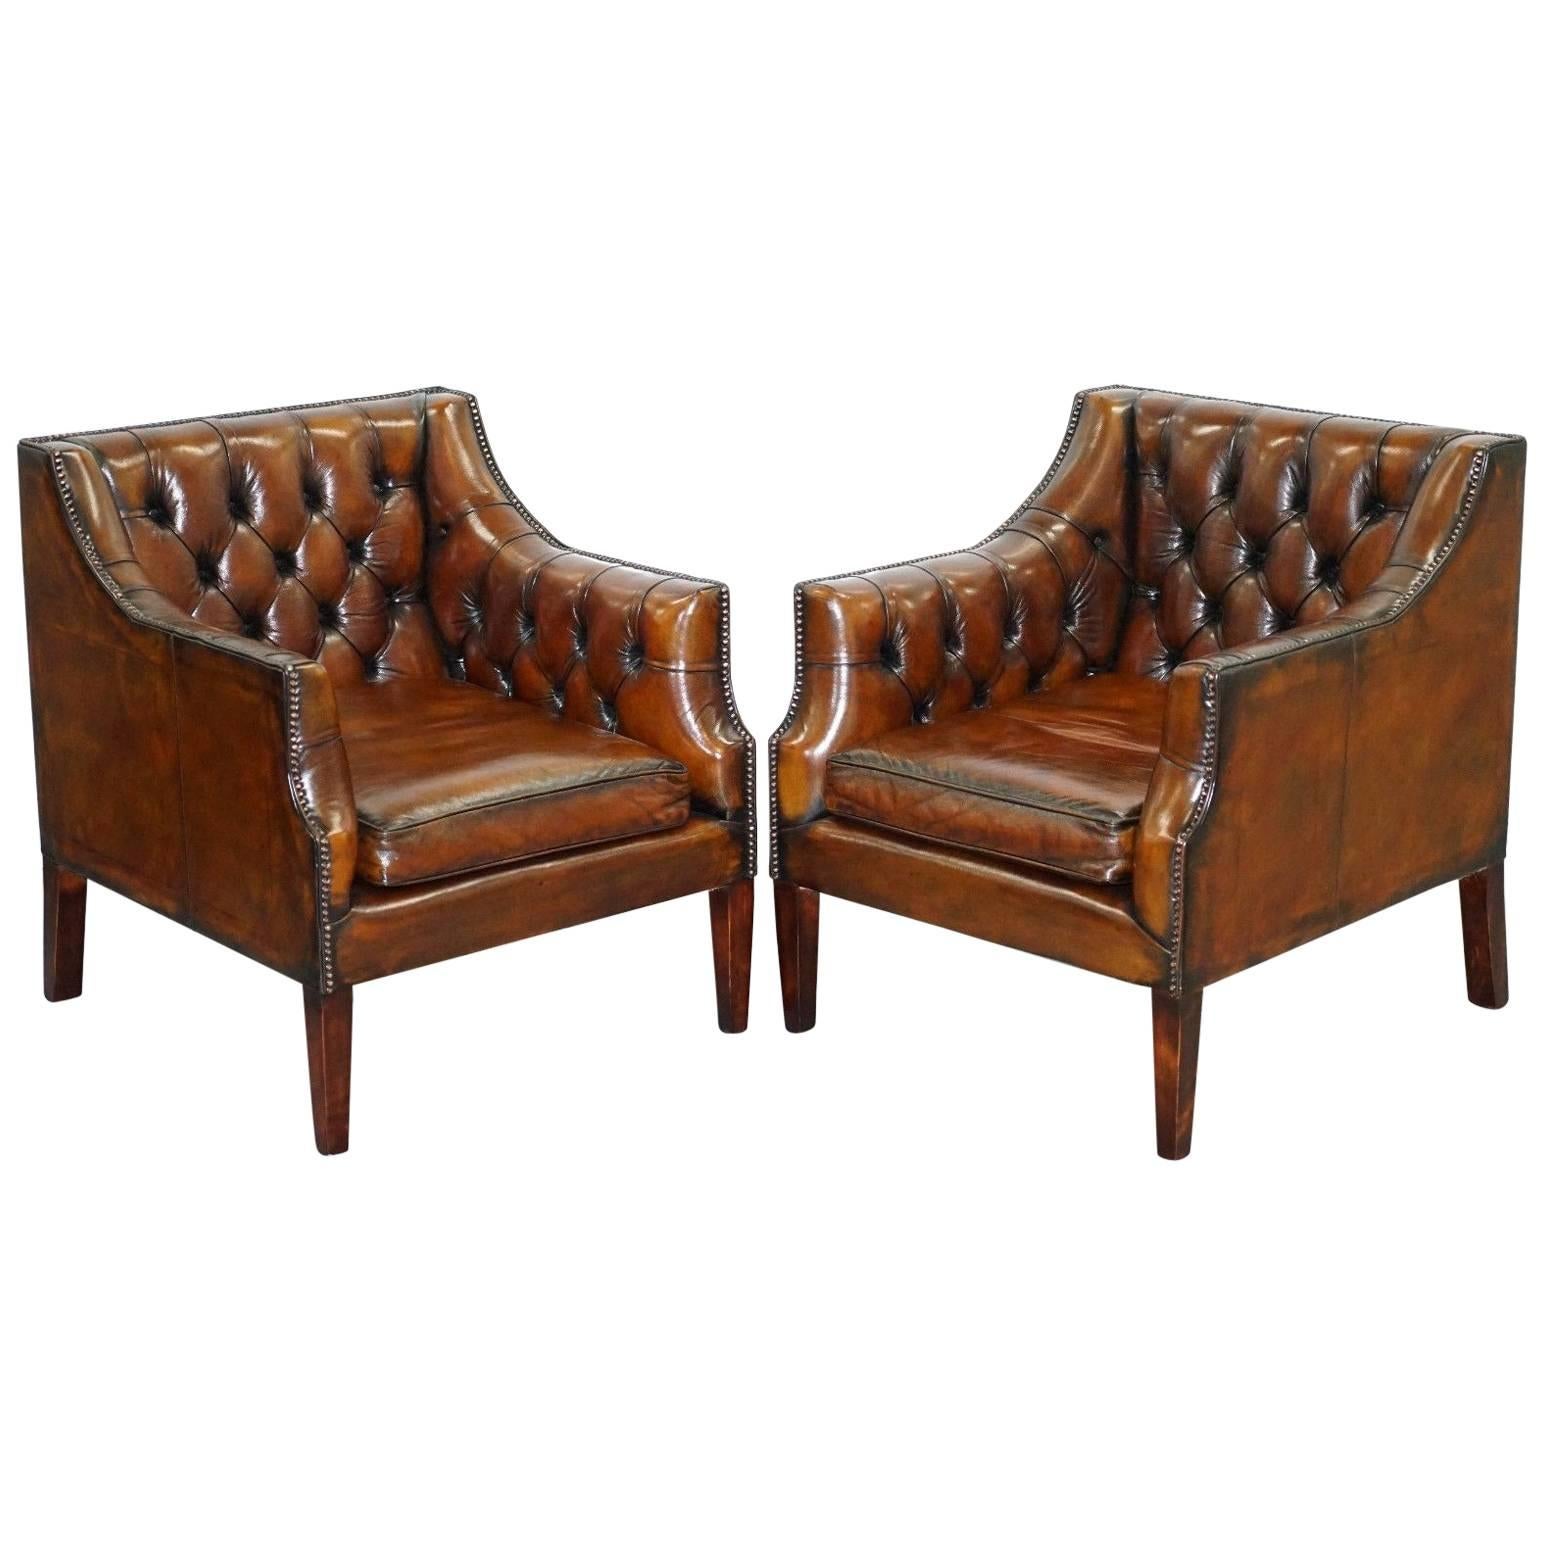 Pair of George Smith Chesterfield Armchairs in Brown Leather